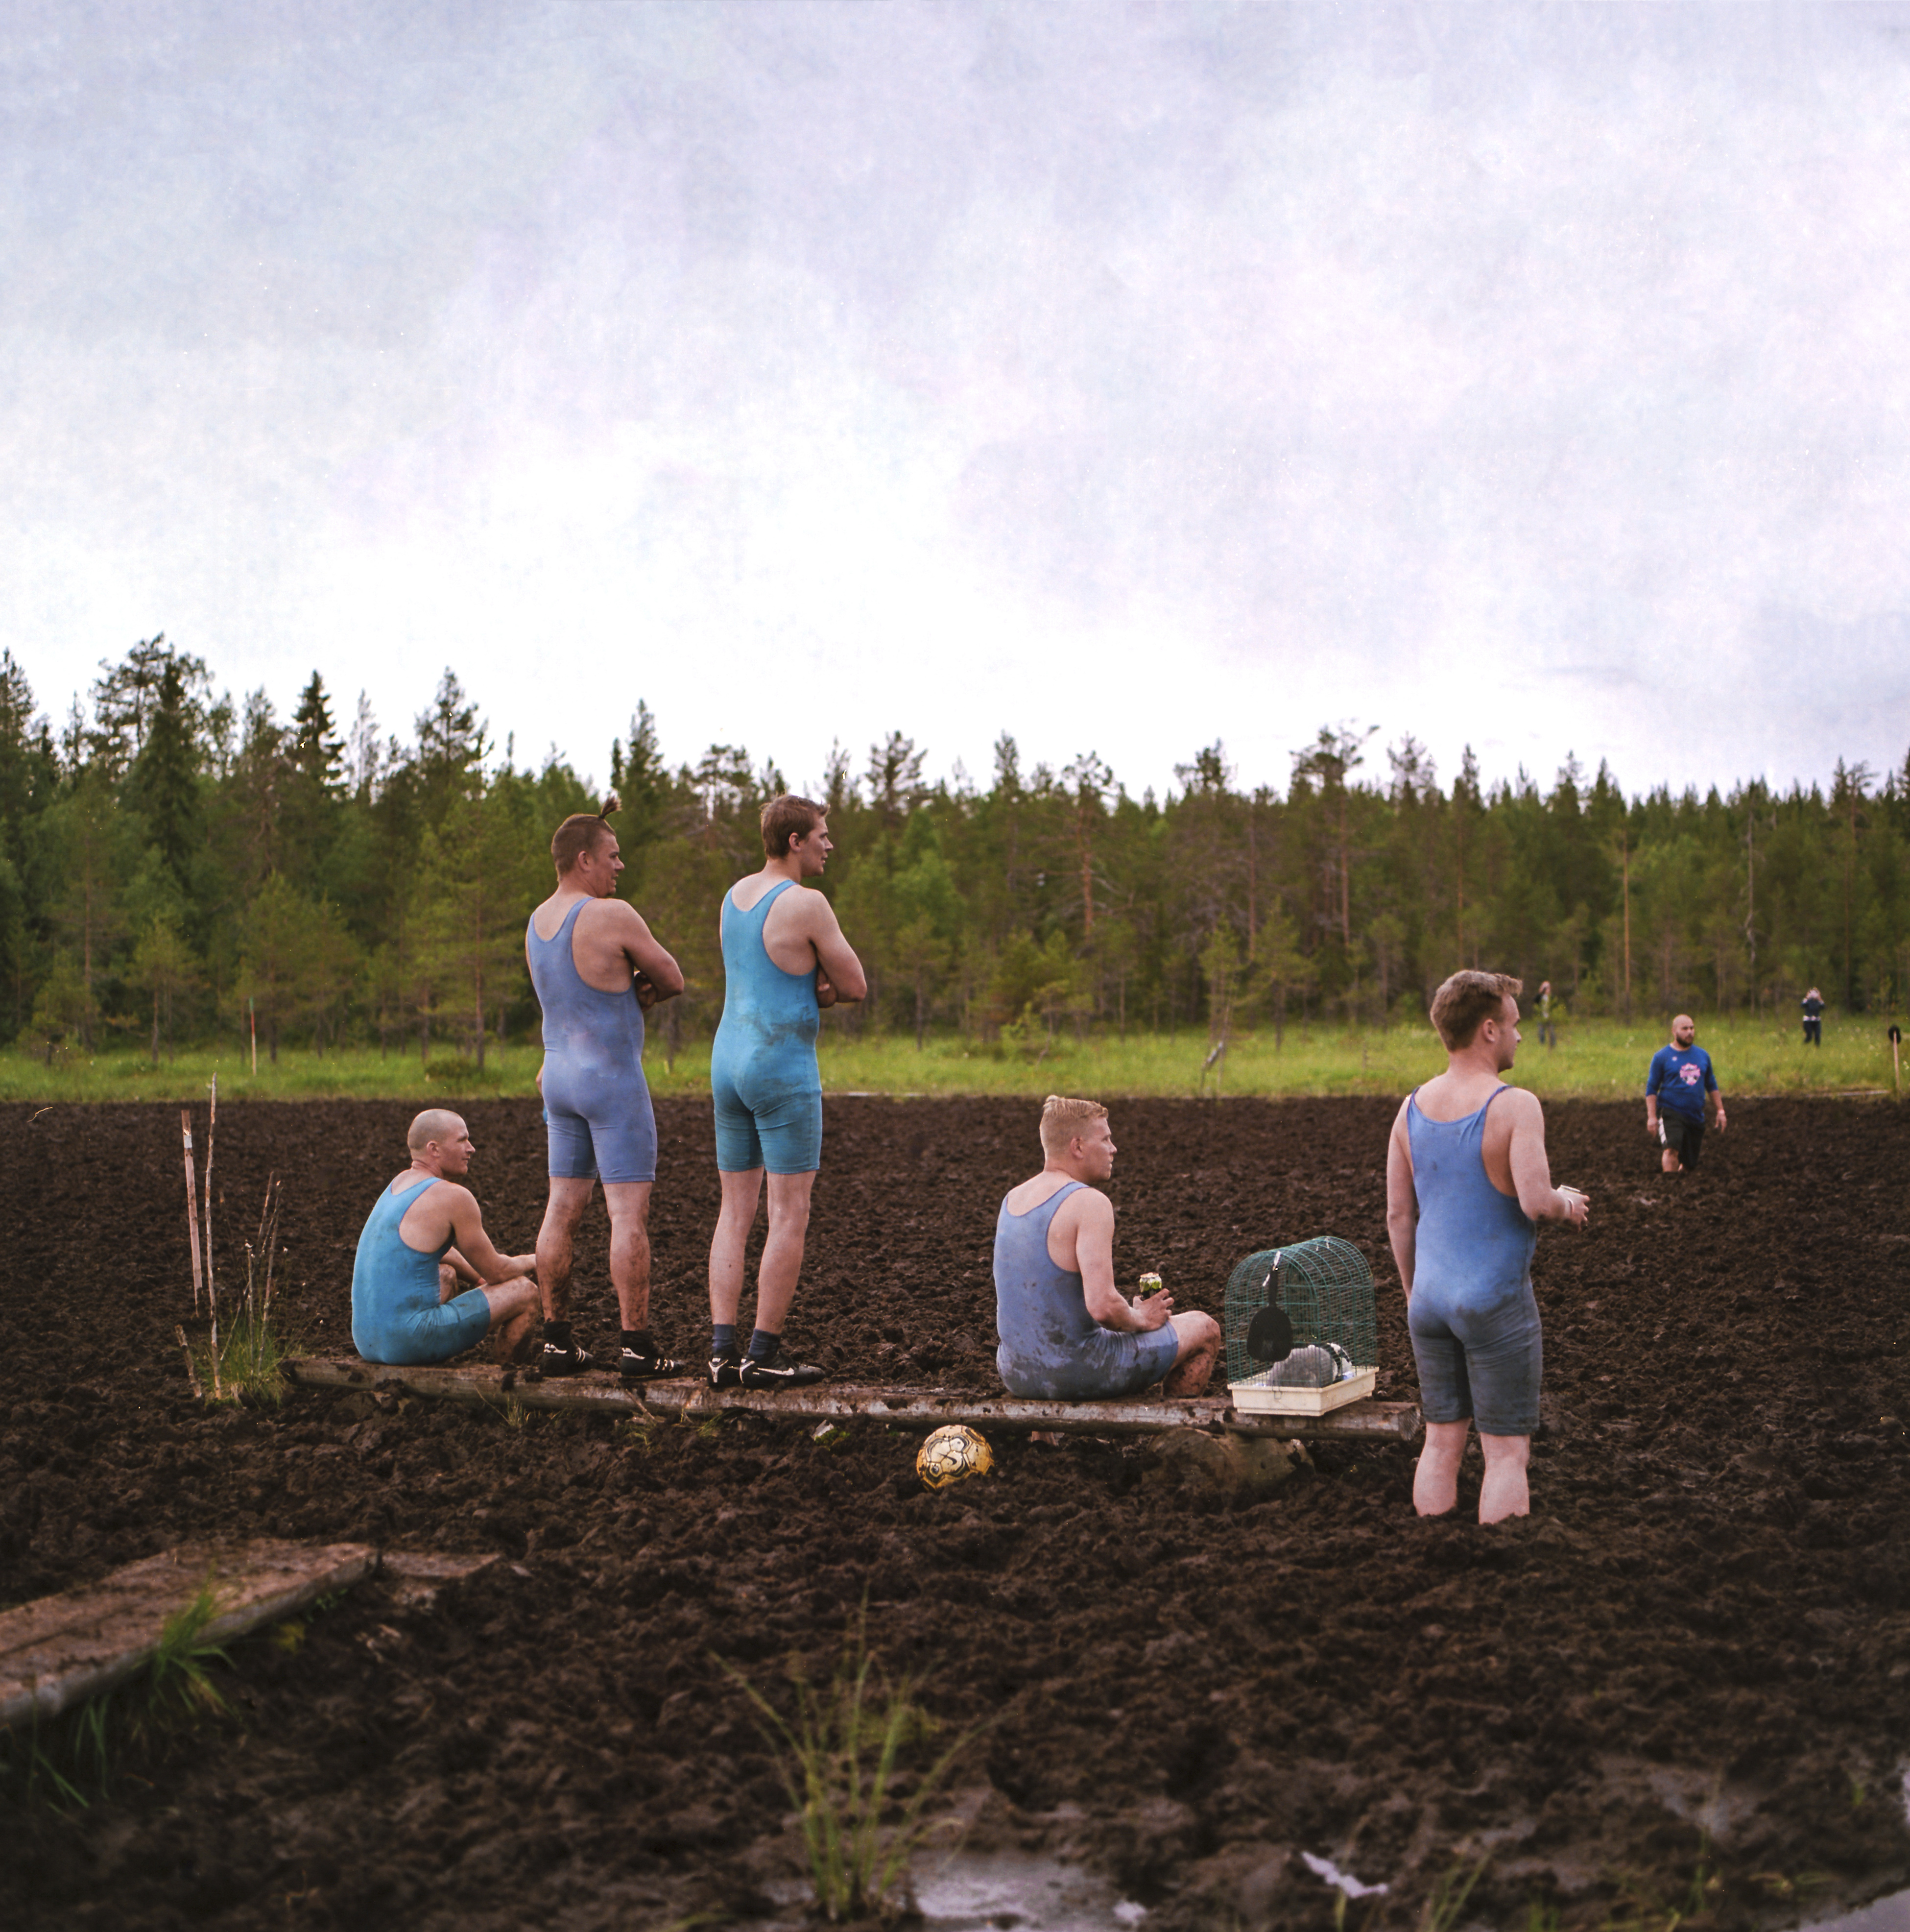 A team from Vihti, Finland during swamp soccer competition in Hyrynsalmi, Finland, in July of 2017. More than 2,000 people ventured to the remote backwaters of central Finland recently for the 20th annual Swamp Soccer World Championships, further proof of the country's growing penchant for screwball sports competitions. (Janne Krkk/The New York Times)